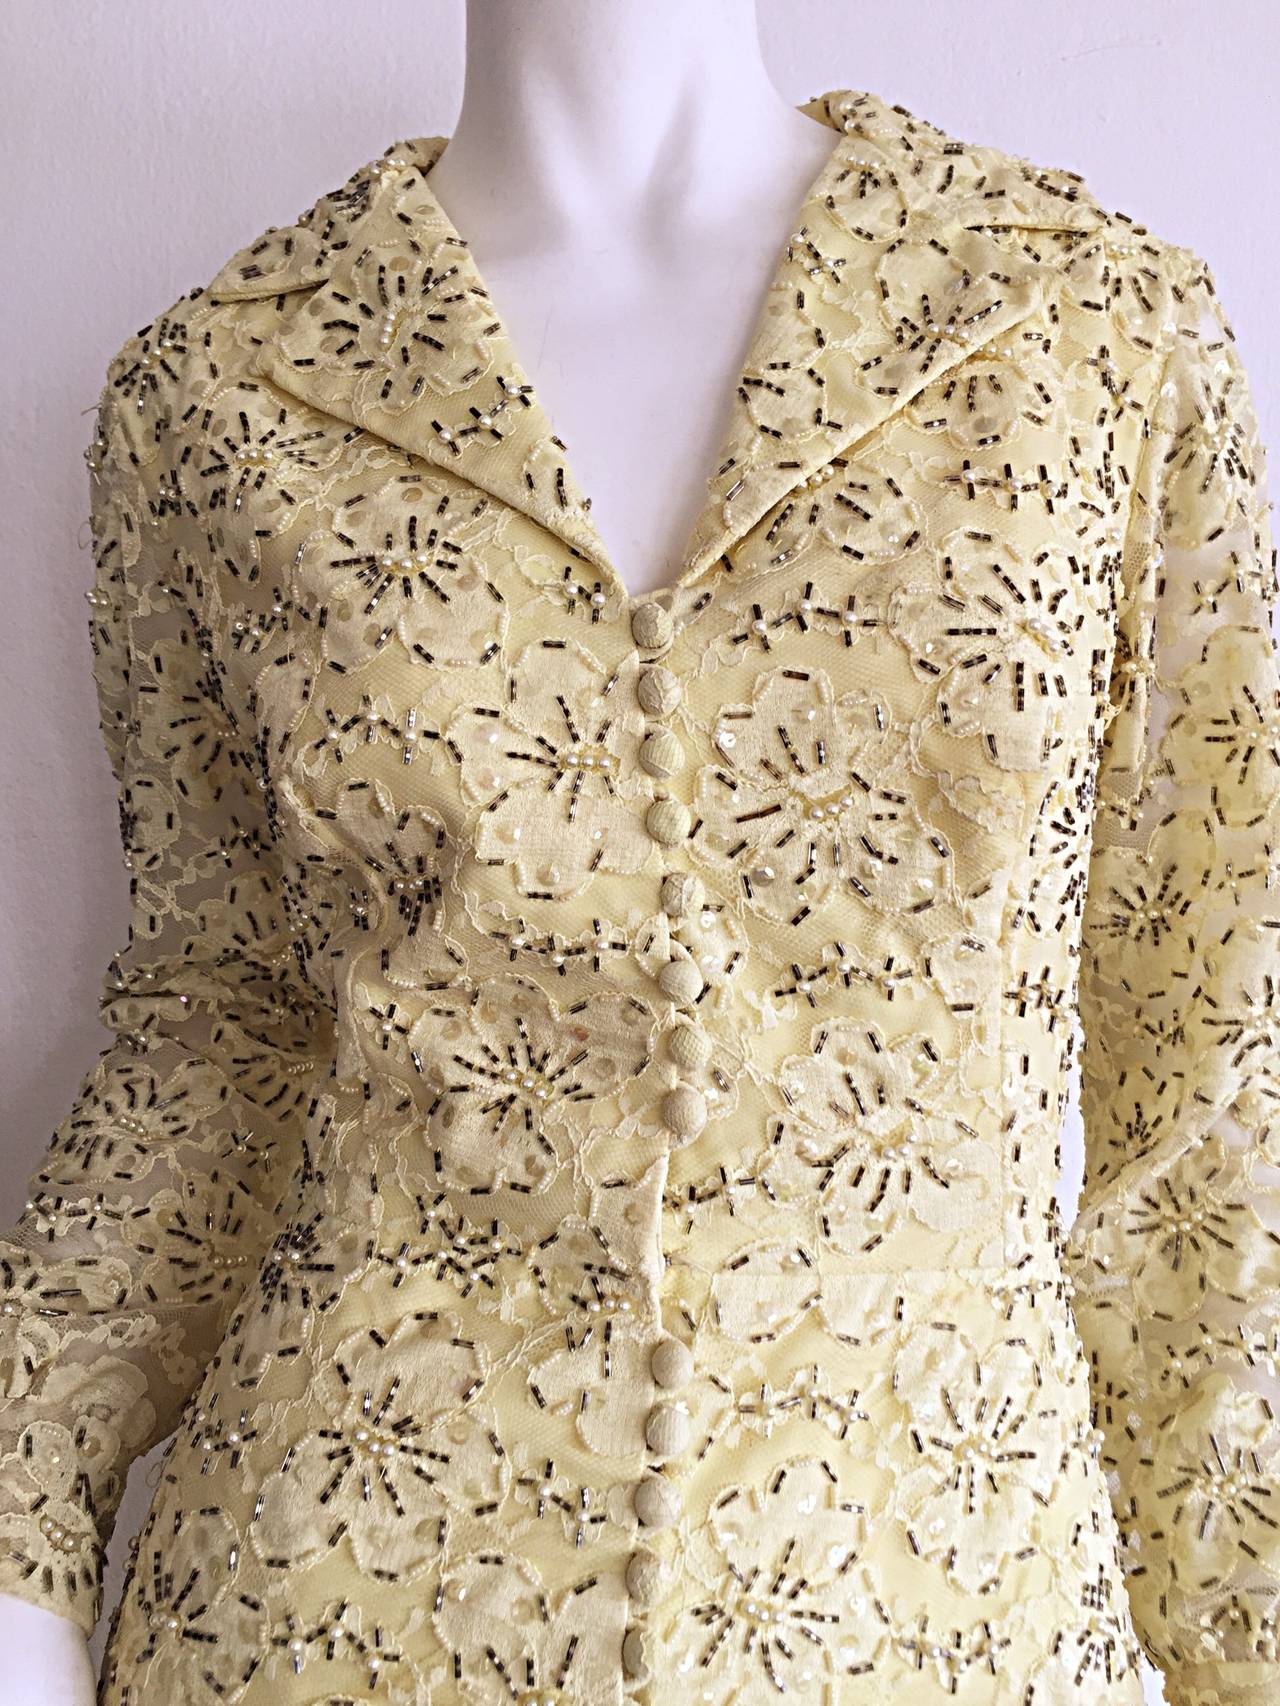 Gorgeous late 1960s / early 1970s pale yellow vintage lace dress. Heavily beaded in ways which compliment and match the lace. Thousands of beads and sequins throughout this wonderful dress! Functional lace covered buttons up the front. Dress is